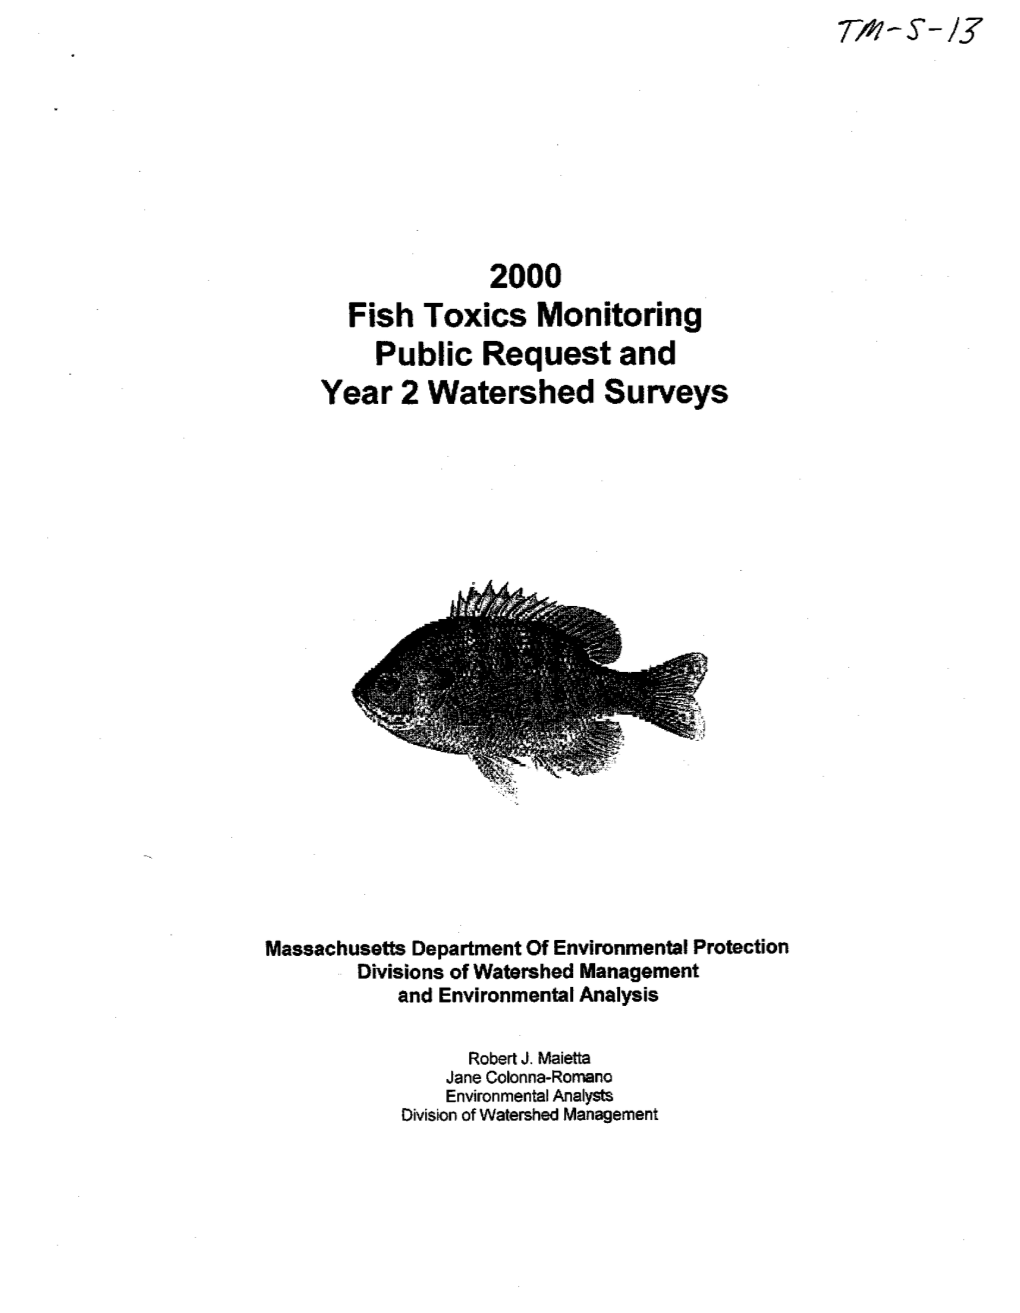 2000 Fish Toxics Monitoring Public Request and Year 2 Watershed Surveys